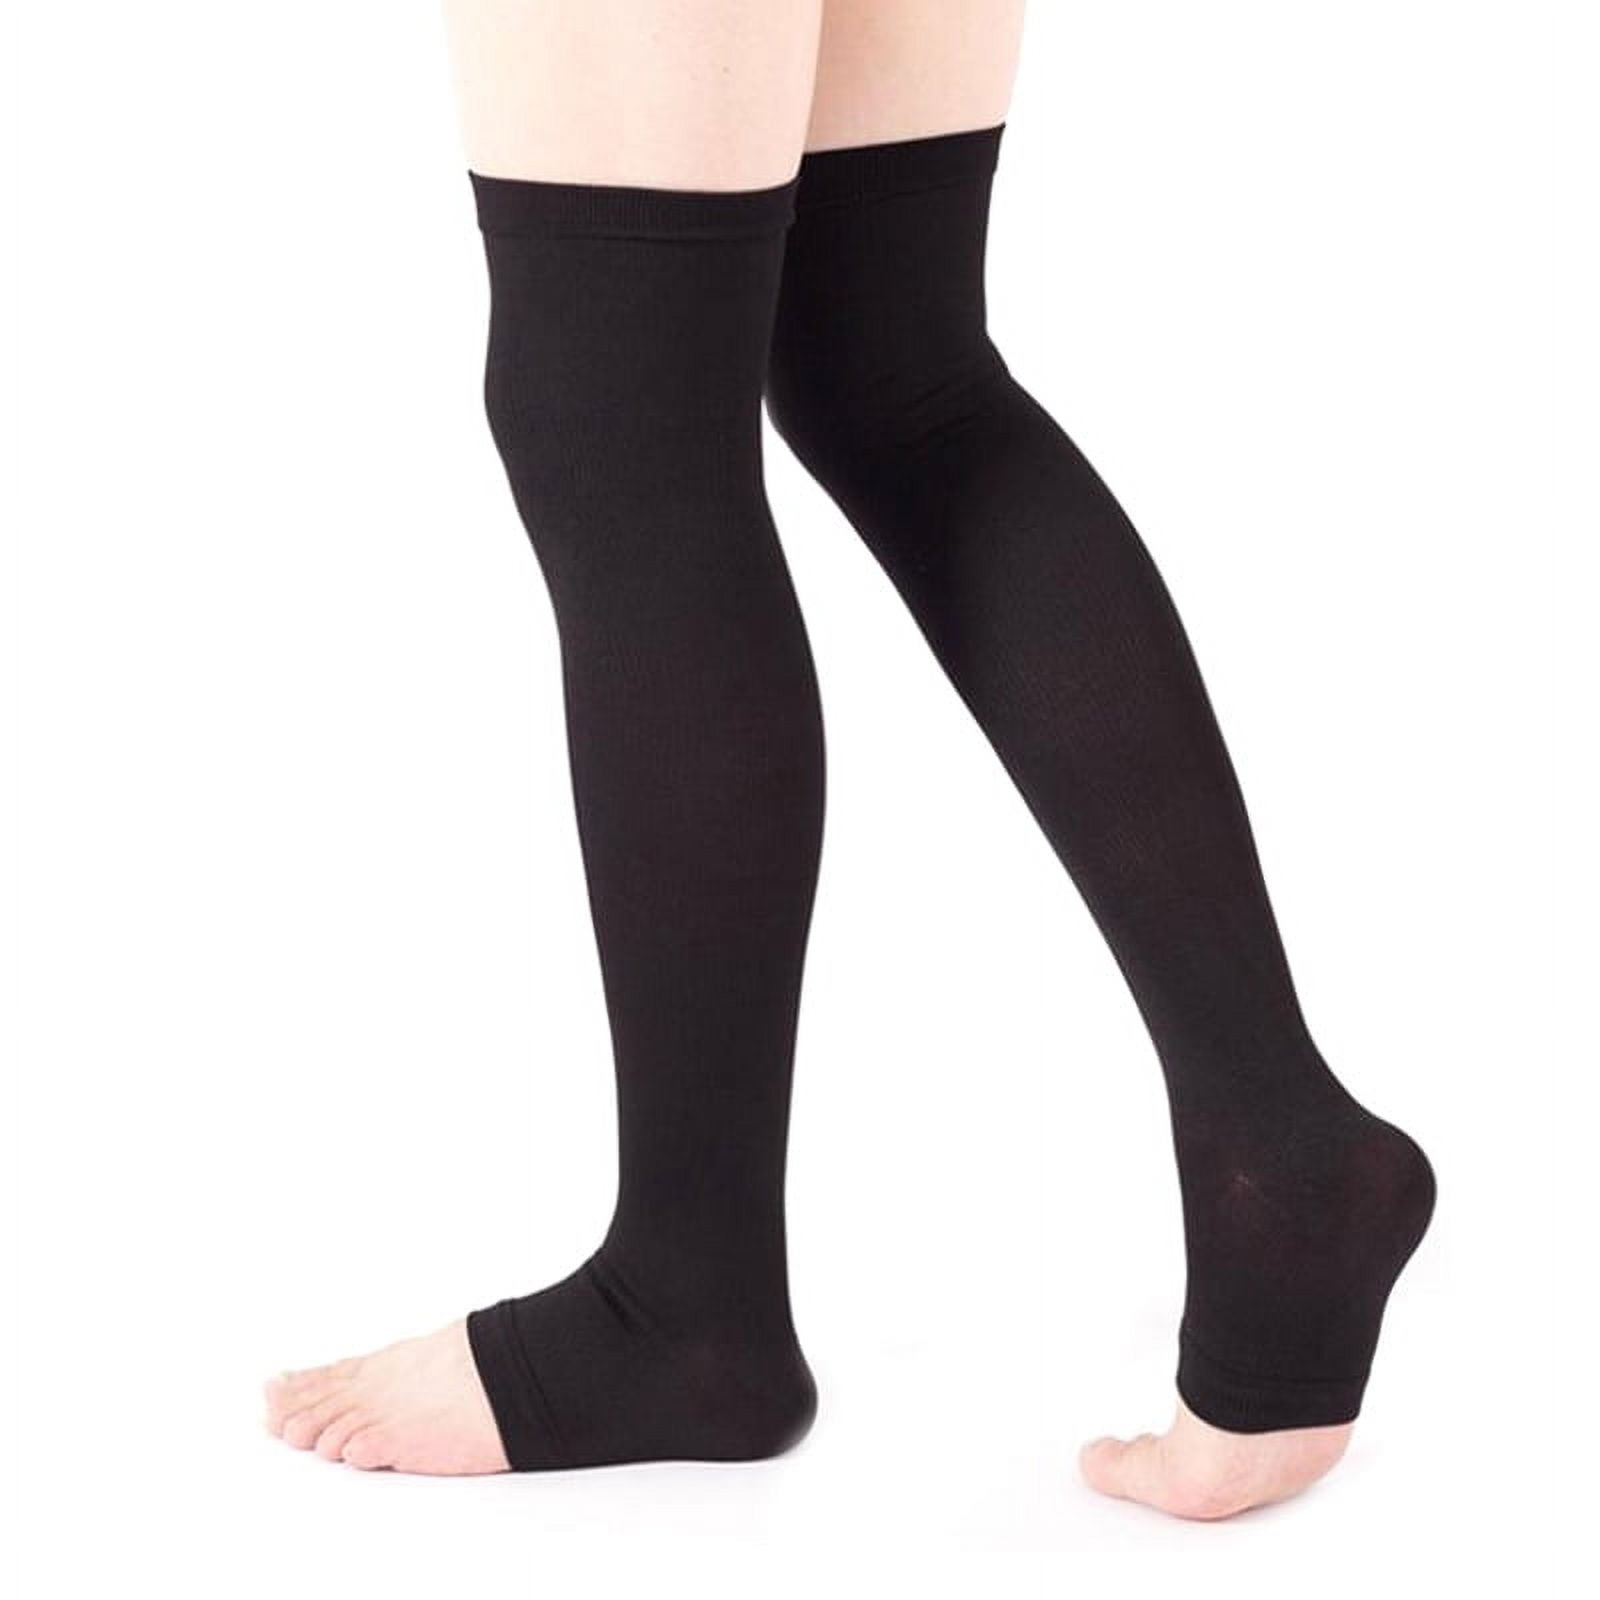 1 Pair High Compression Socks Leg Support Stretch Compression Socks Knee  High Stockings Open Toe Socks for Men Women, Anti Fatigue Pain Relief,  Helps Circulation, Varicose Veins 